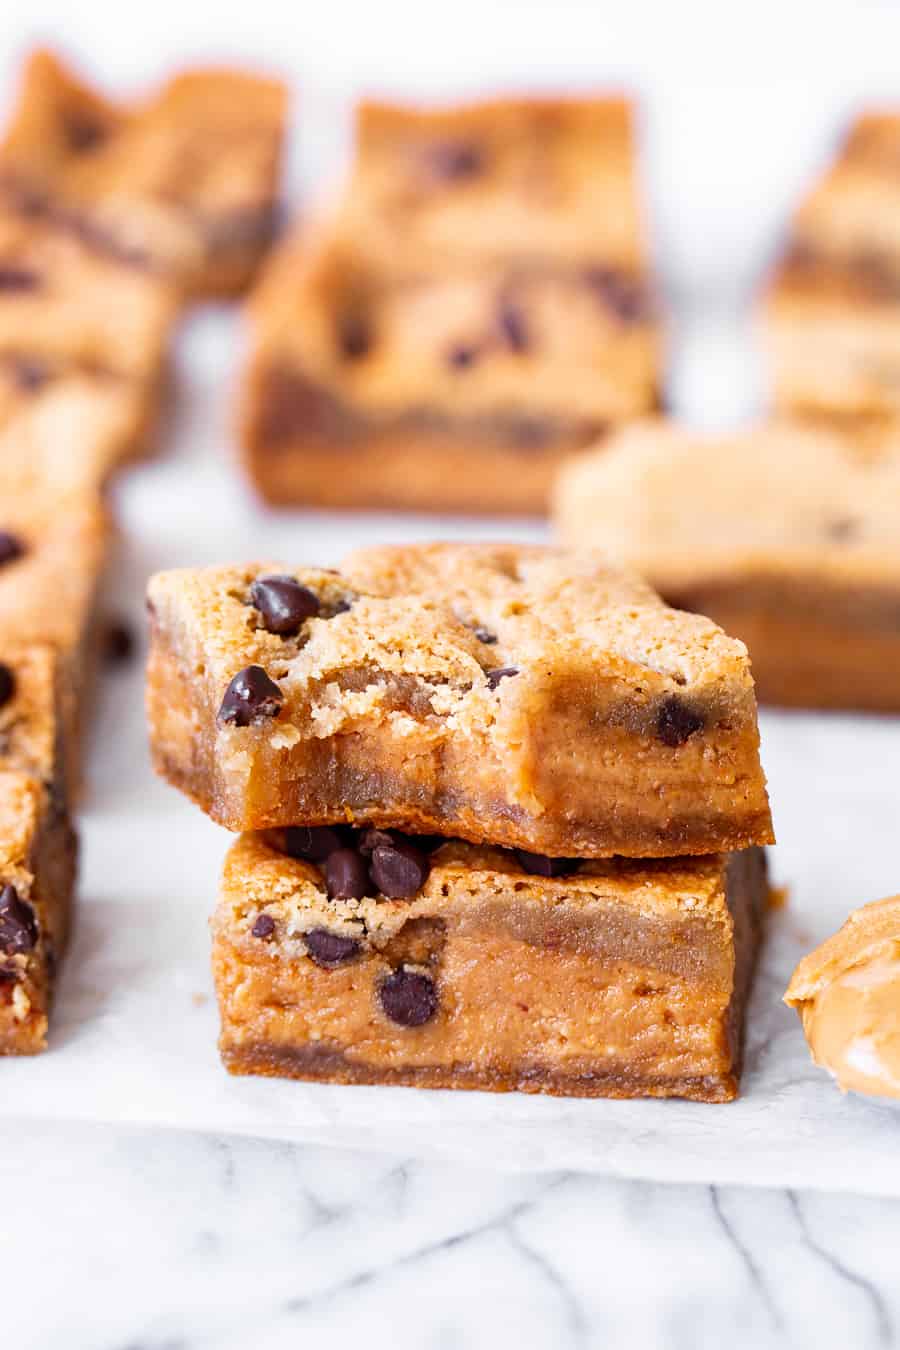 These super fudgy chocolate chip blondies are stuffed with a thick fudgy layer of nut butter for the dreamiest “peanut” butter stuffed blondies you’ll ever make!  They’re gluten free, dairy free, vegan, egg free and insanely delicious! #vegan #paleo #glutenfree